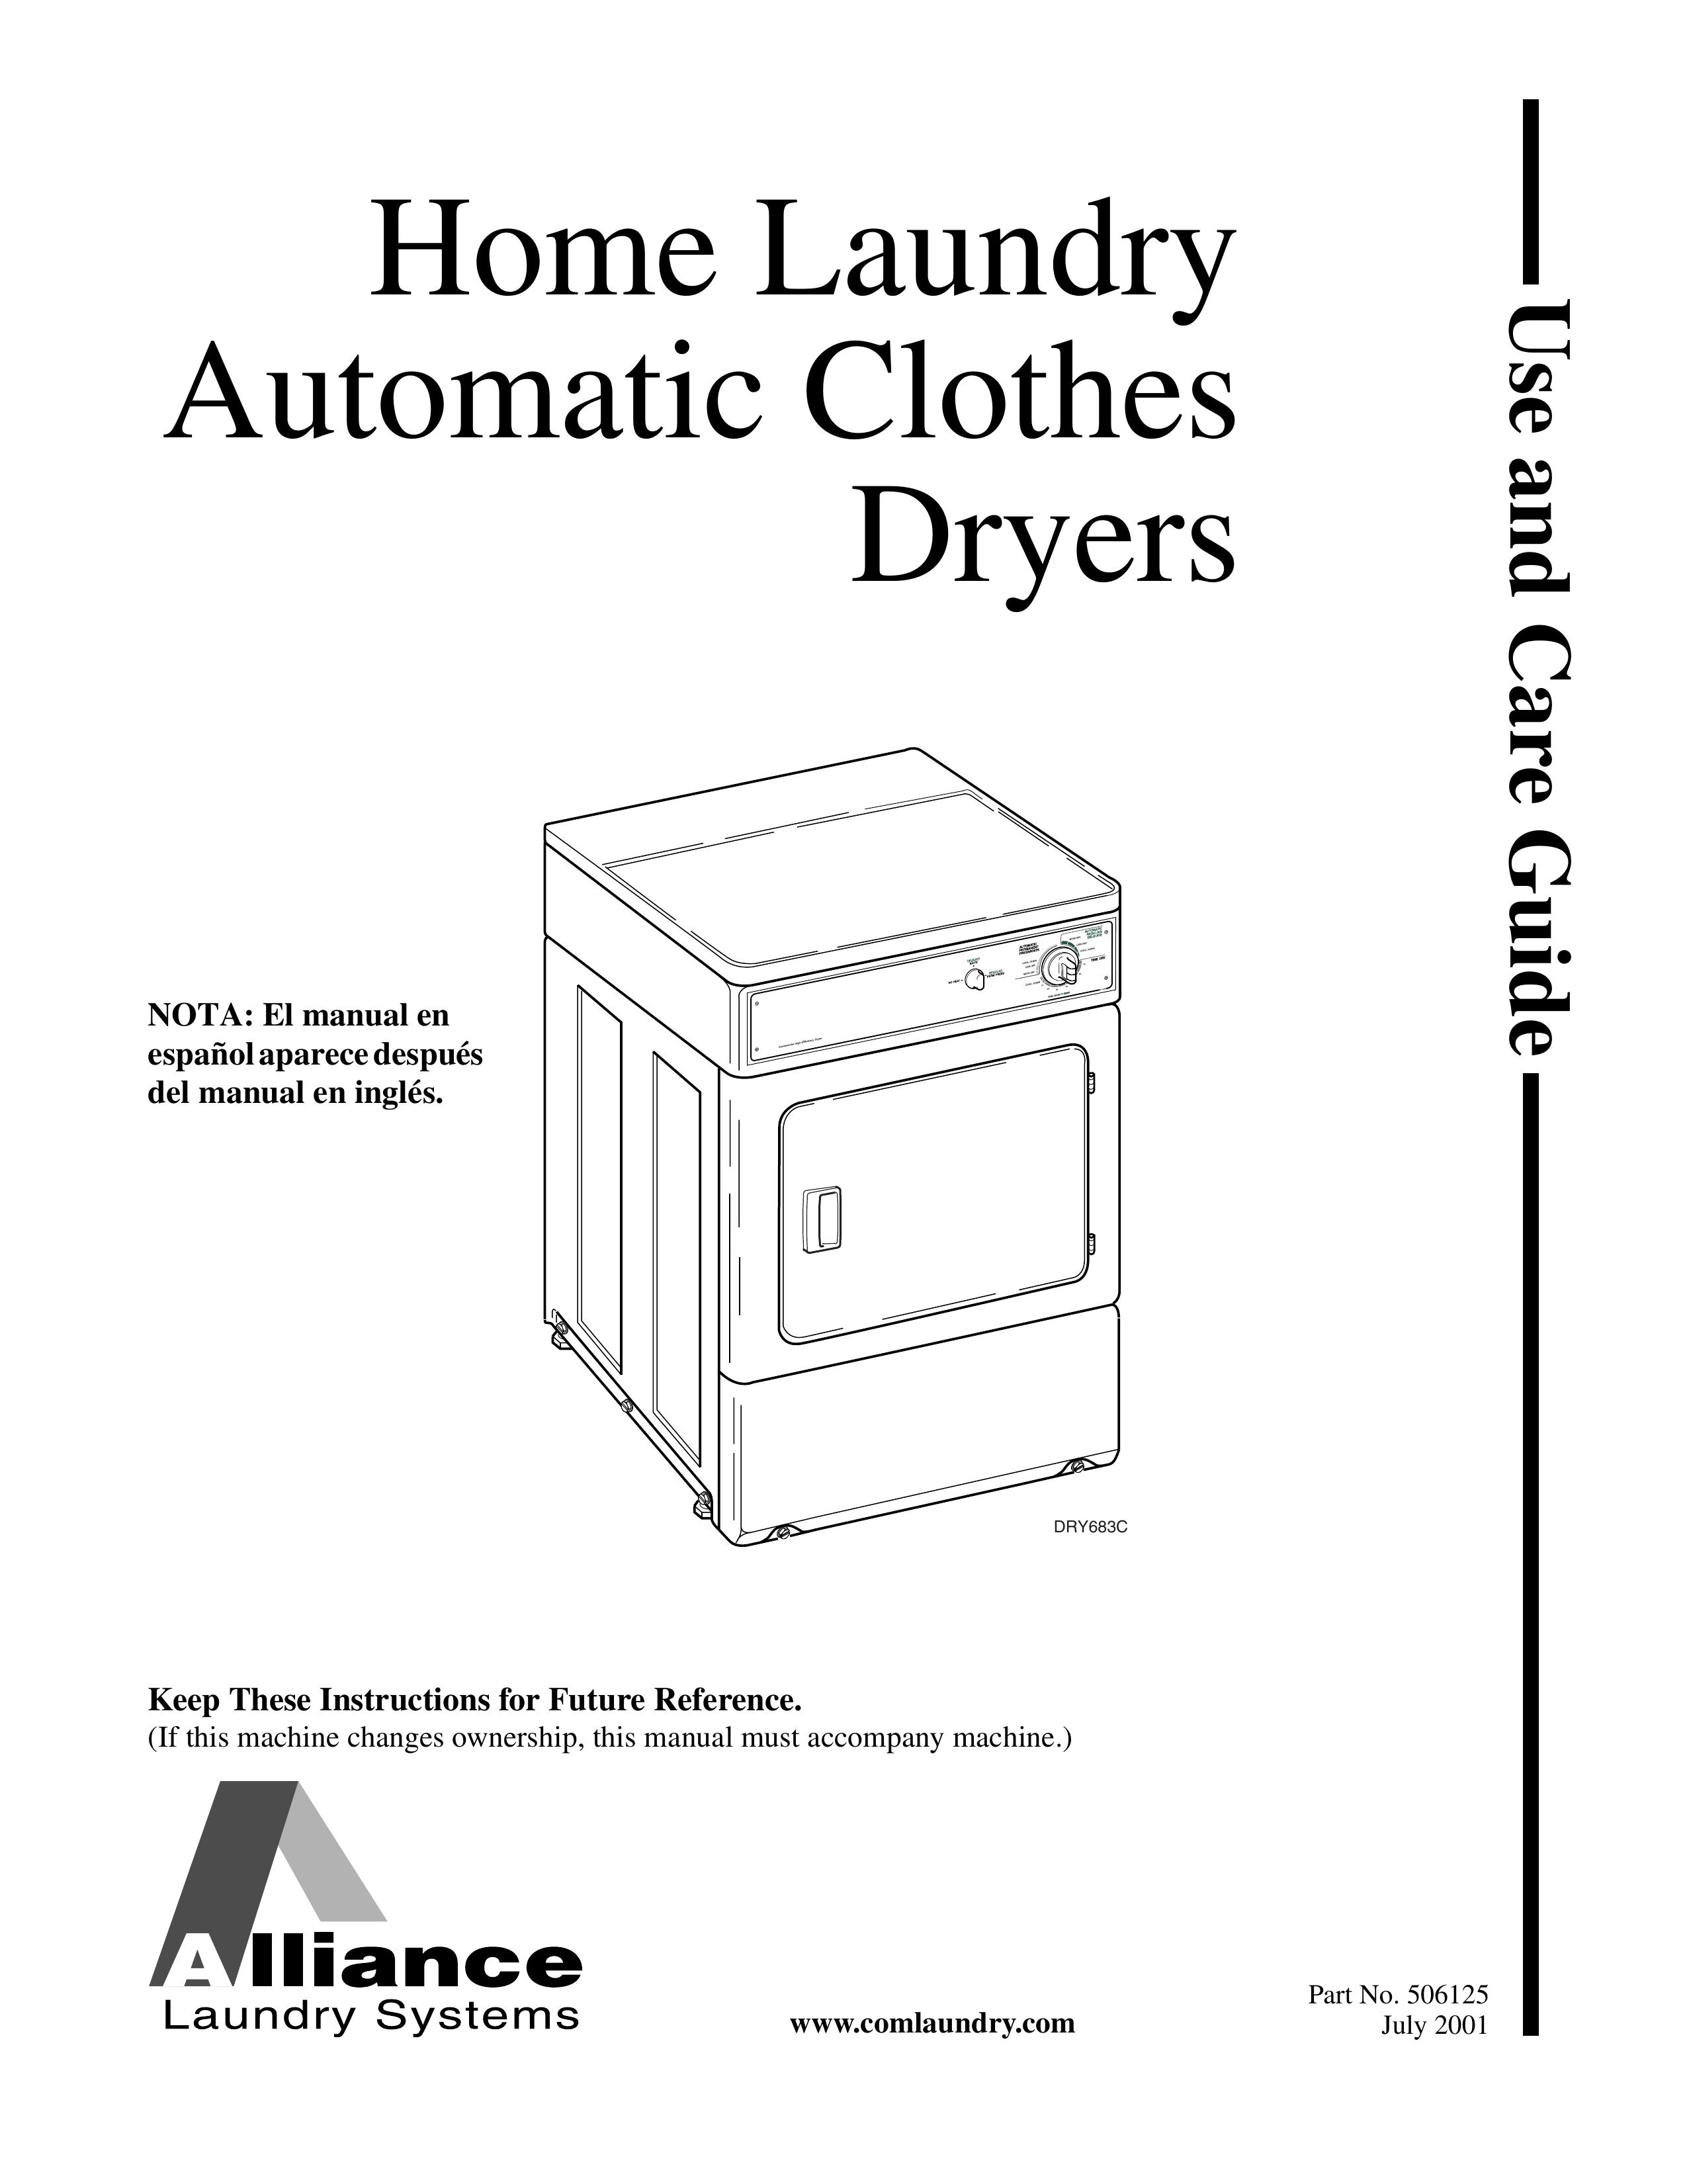 Alliance Laundry Systems DRY683C Washer/Dryer User Manual (Page 1)